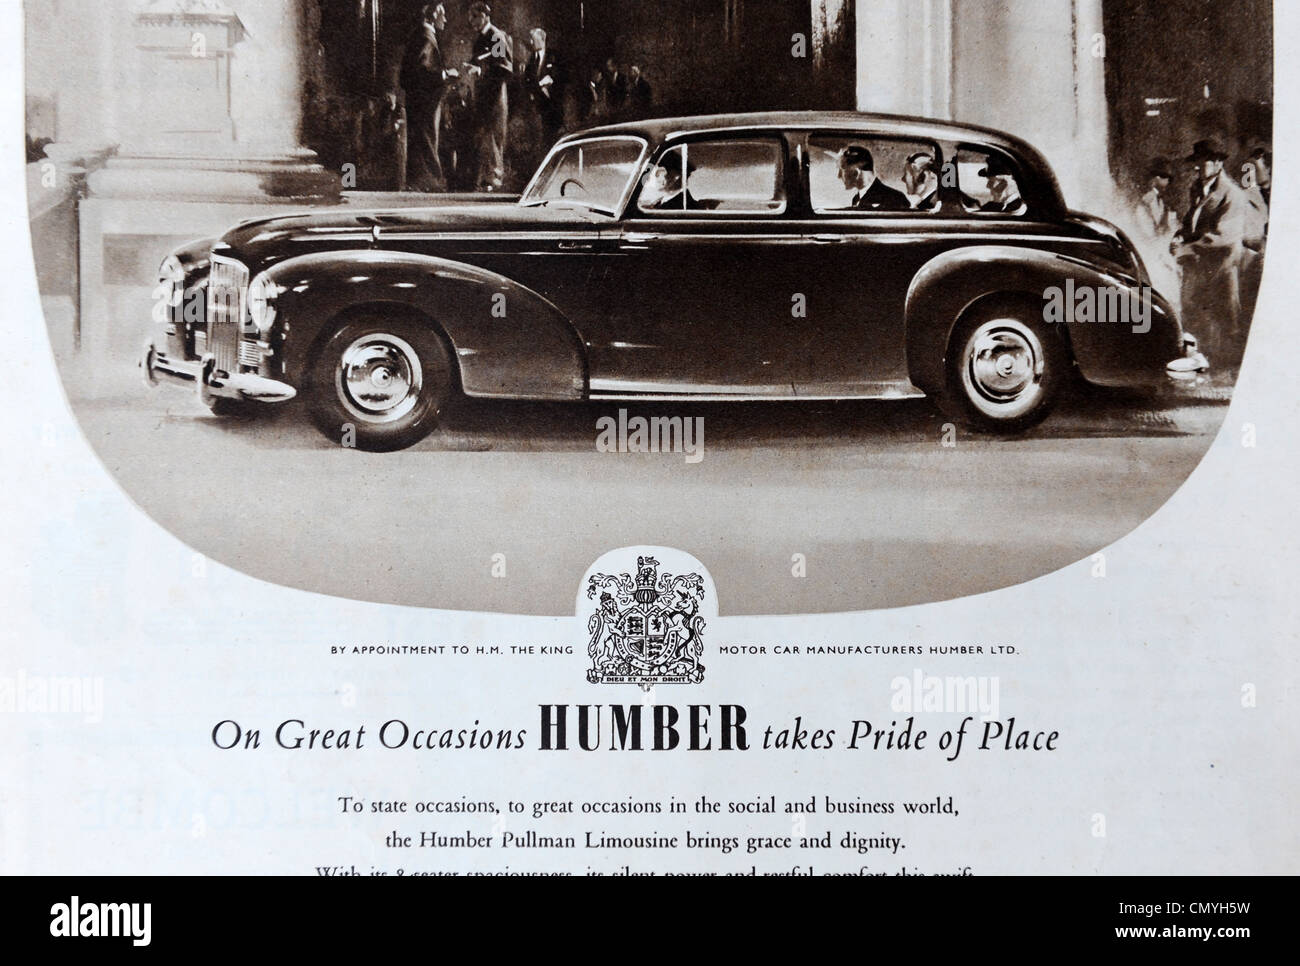 Humber car advert in The Illustrated London News 23/2/52 Stock Photo